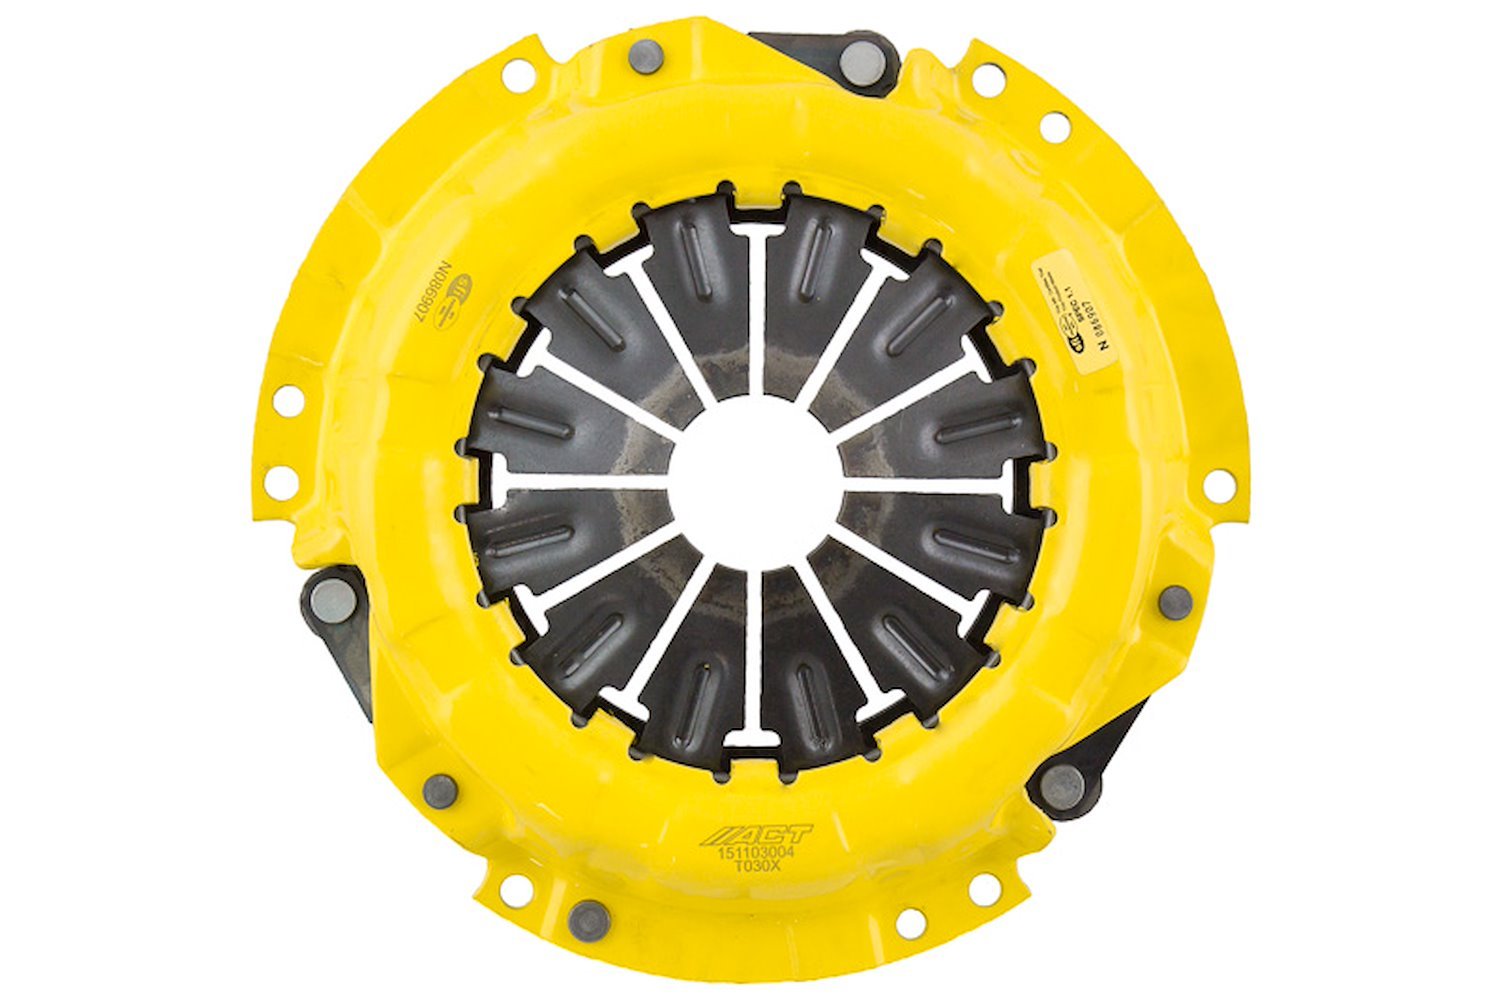 Xtreme Transmission Clutch Pressure Plate Fits Select Multiple Makes/Models